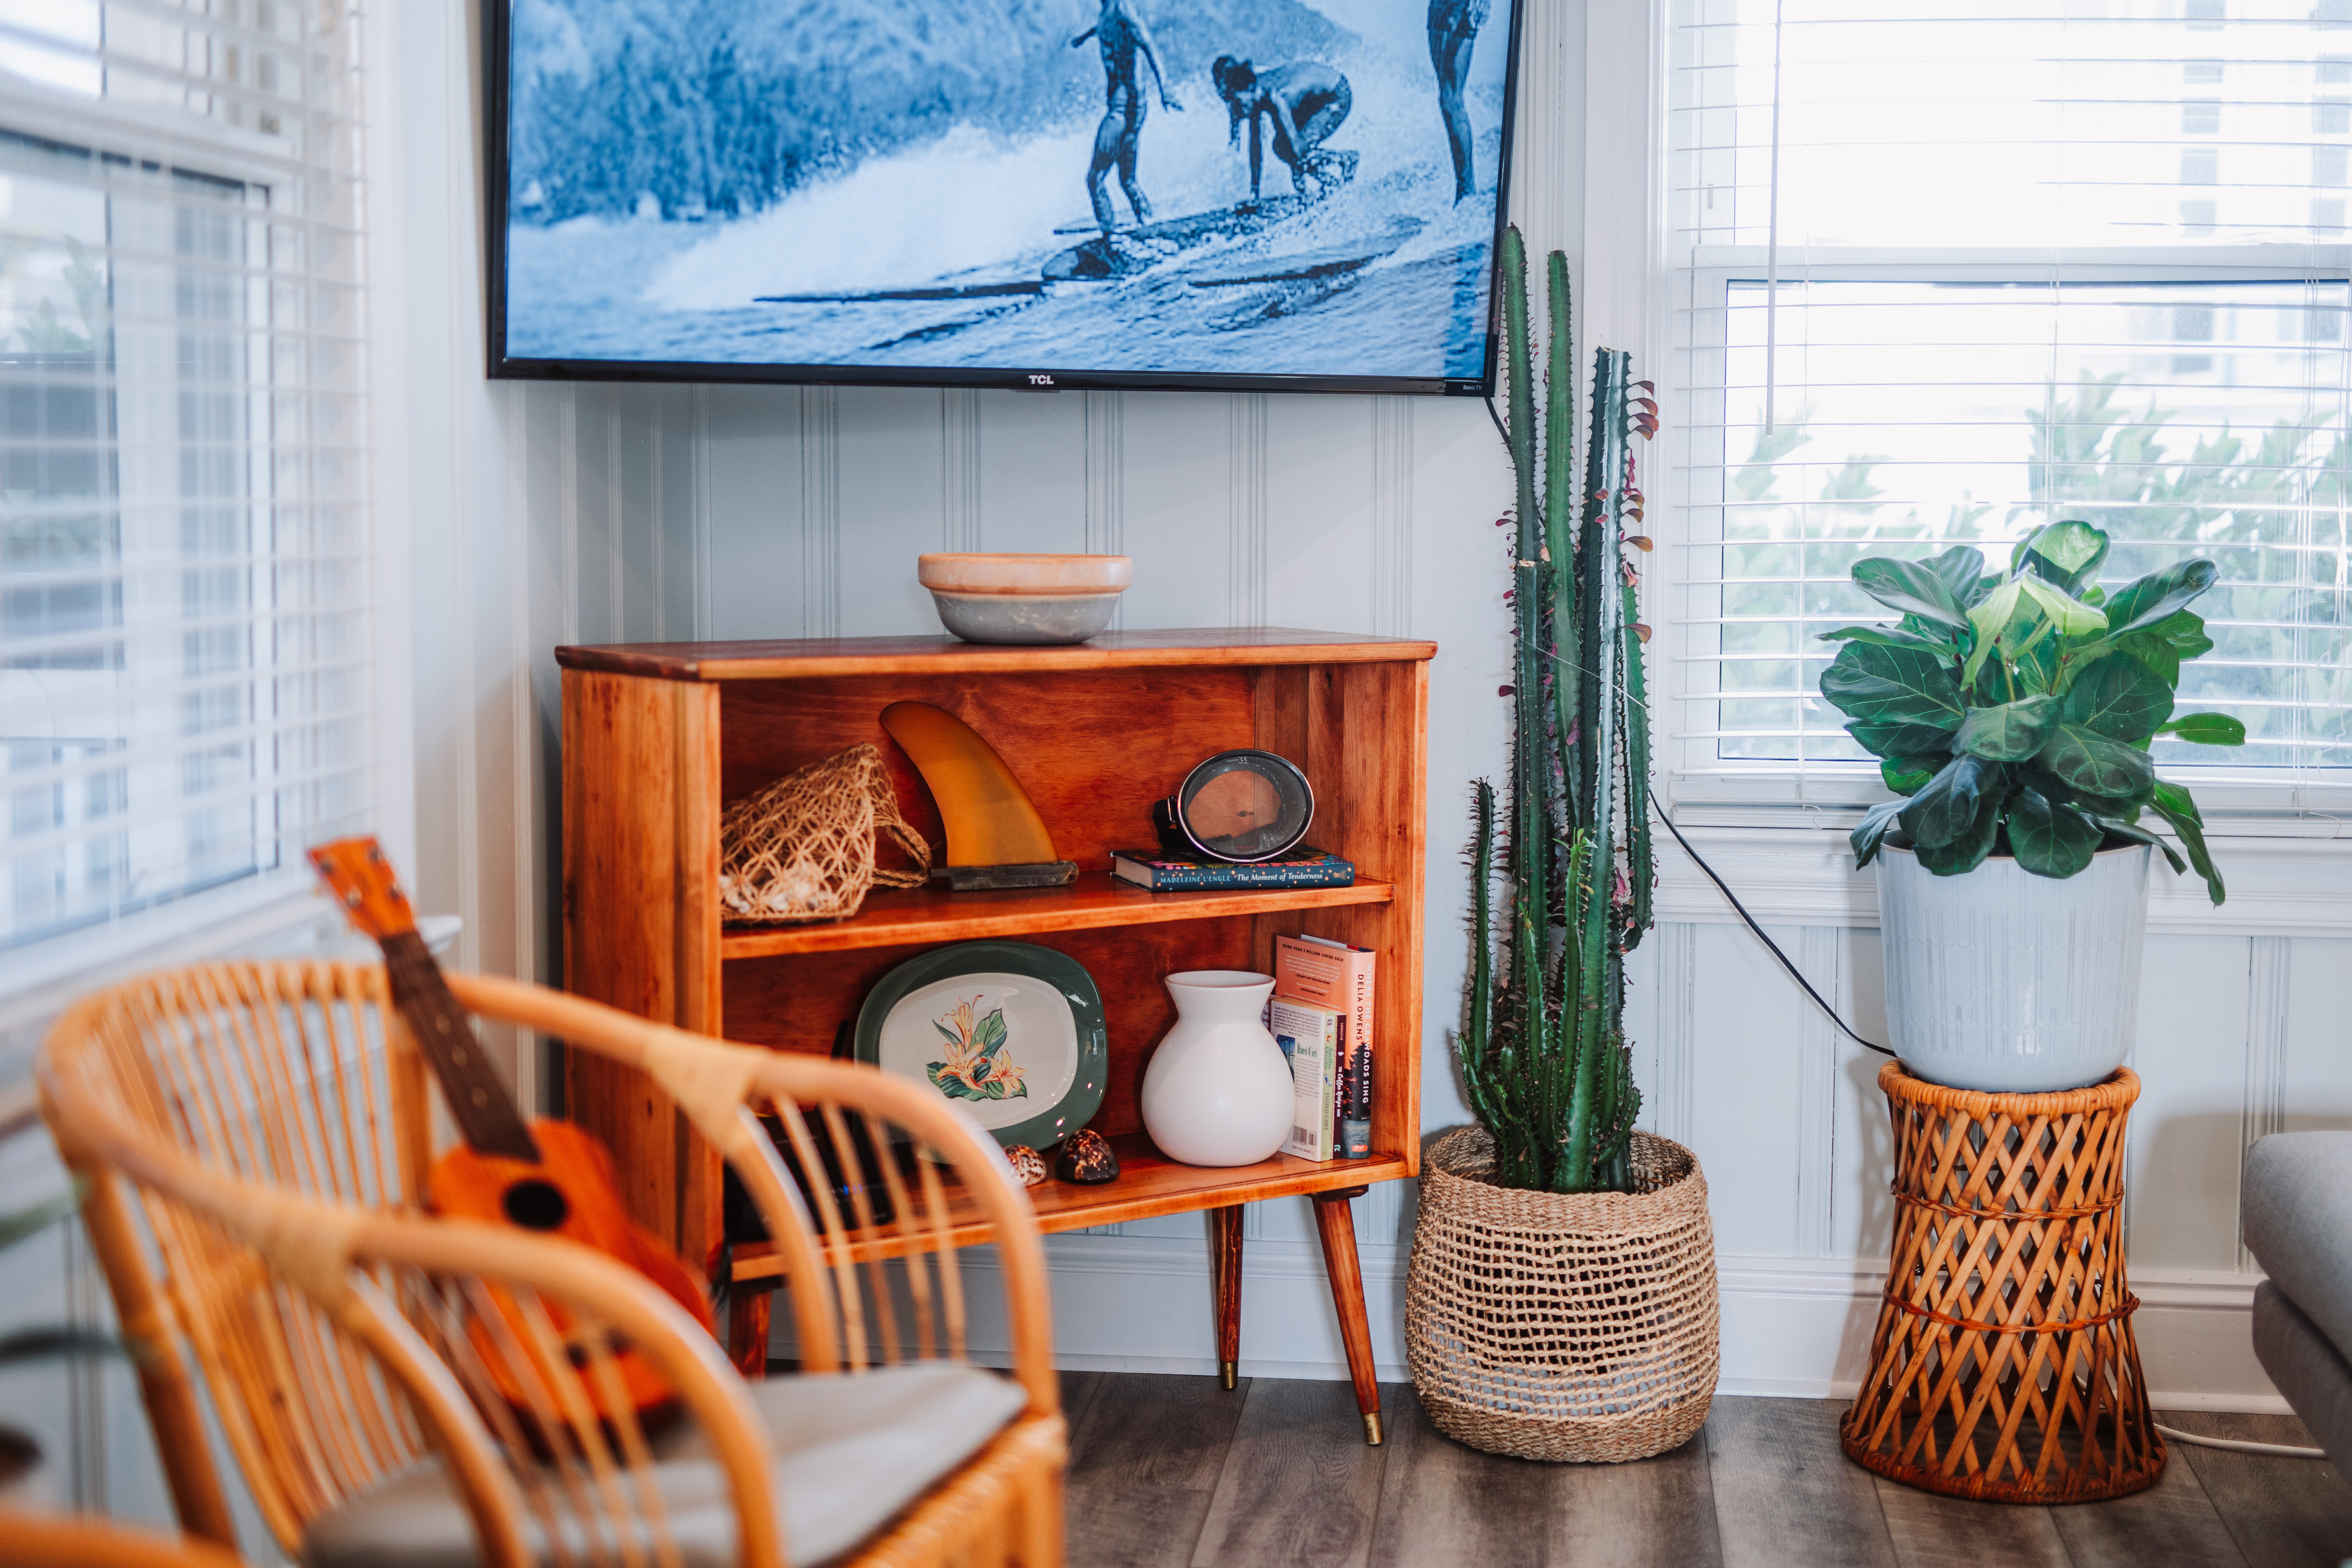 A large smart TV and fast high-speed internet are just a few things that makes this Airbnb in Carolina Beach standout